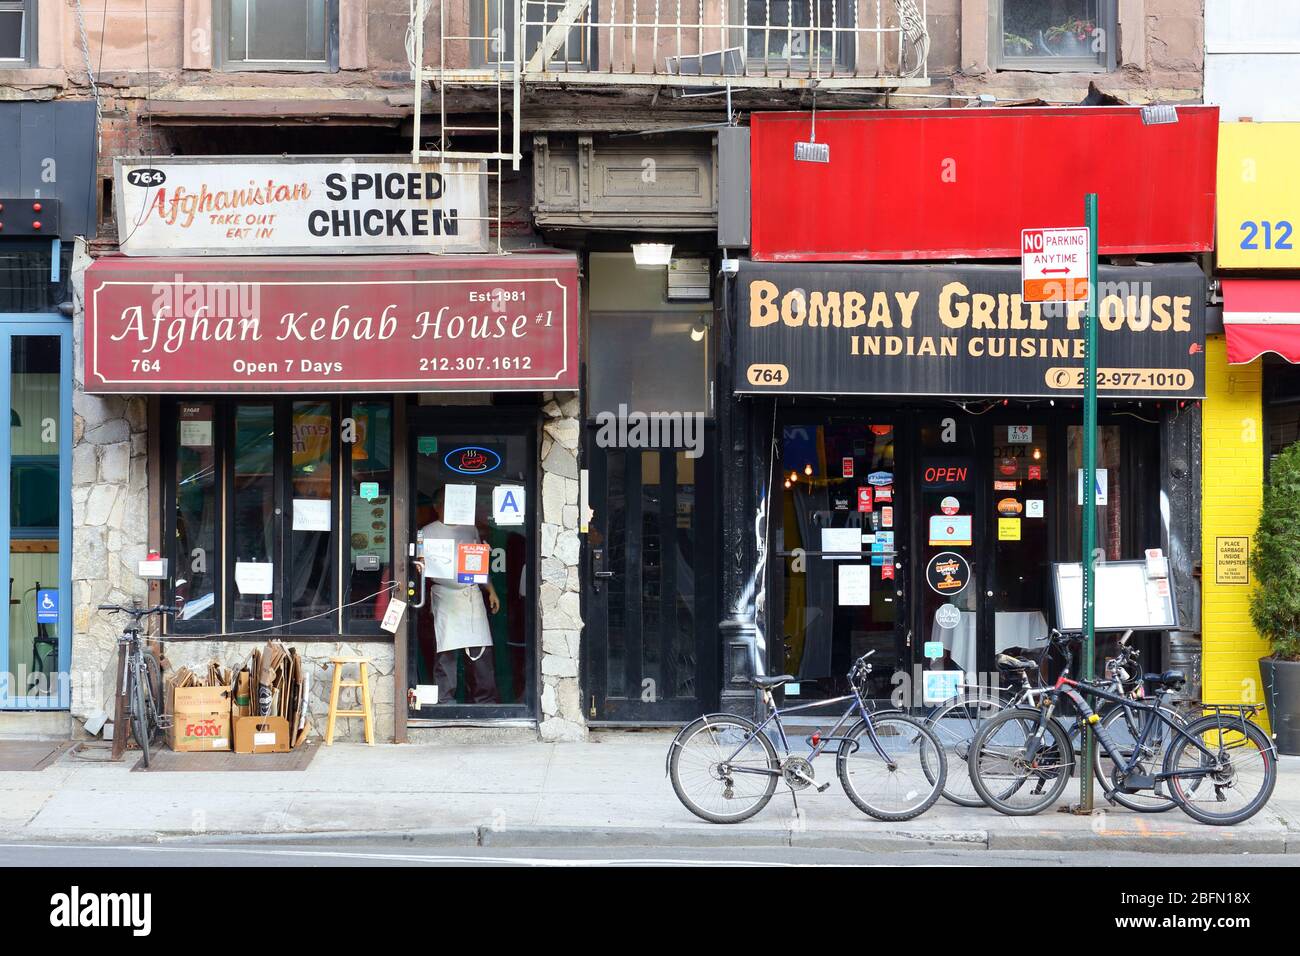 Afghan Kebab House, Bombay Grill House, 764 9th Ave, New York, NYC storefront photo of a Afghan and Indian restaurants in Hells Kitchen. Stock Photo